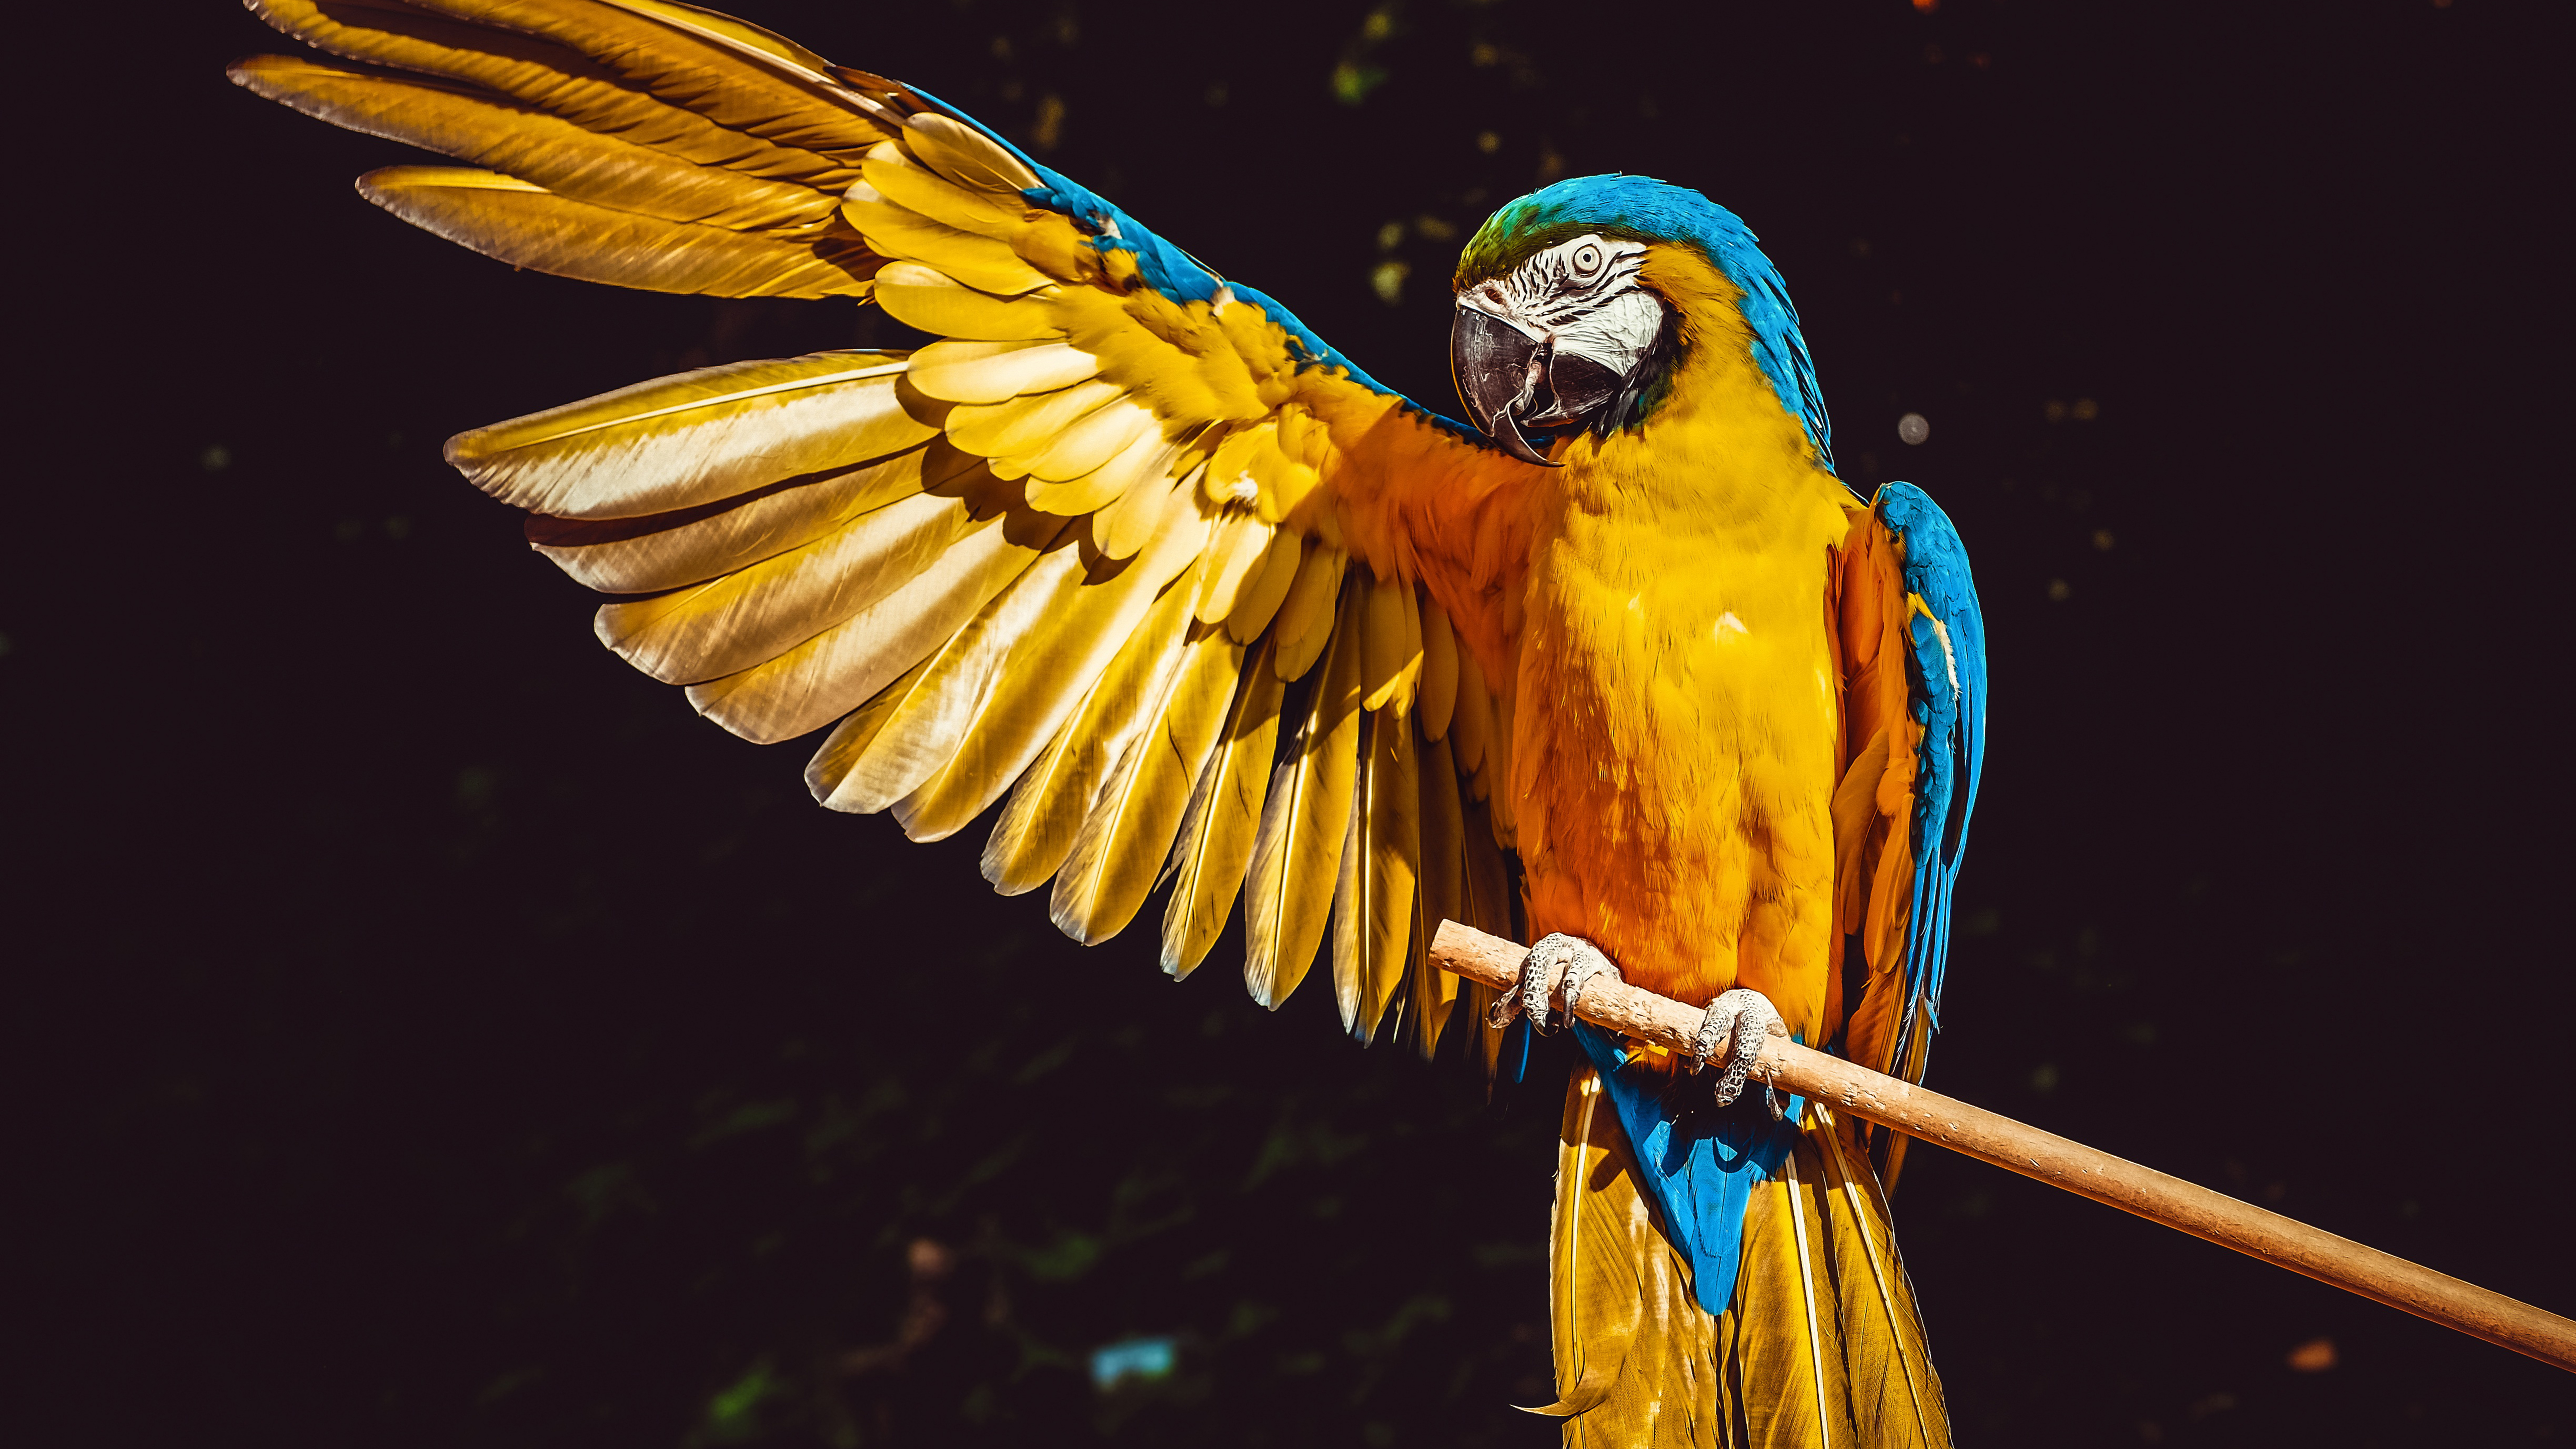 PC Wallpapers parrot, animal, blue and yellow macaw, bird, macaw, wings, birds